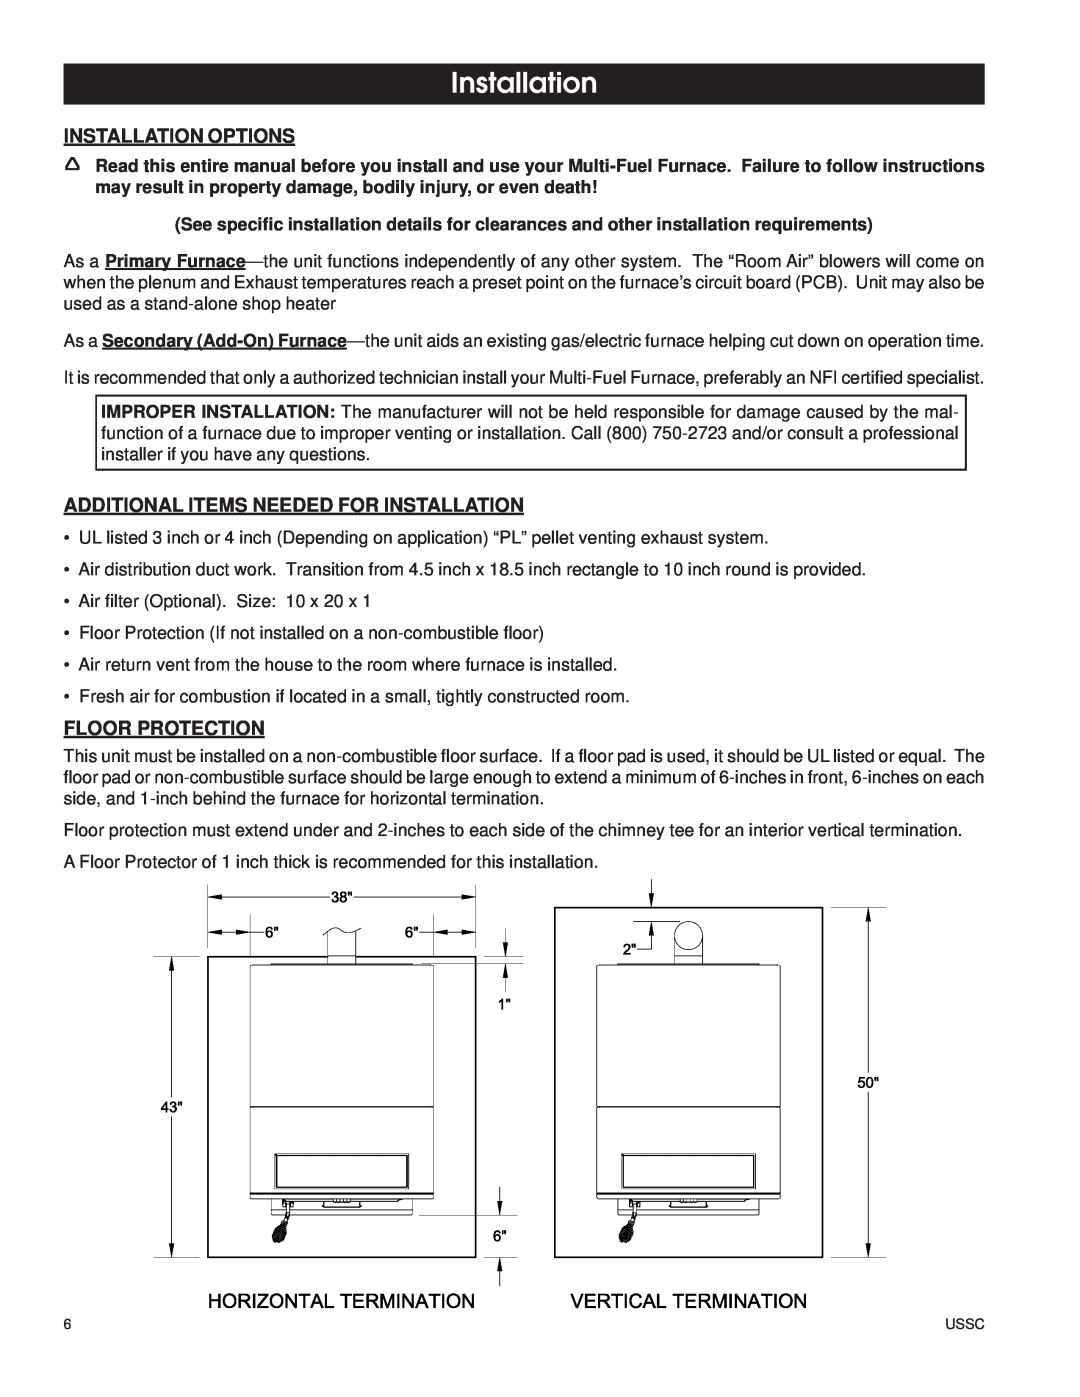 United States Stove 6100 owner manual Installation Options, Additional Items Needed For Installation, Floor Protection 